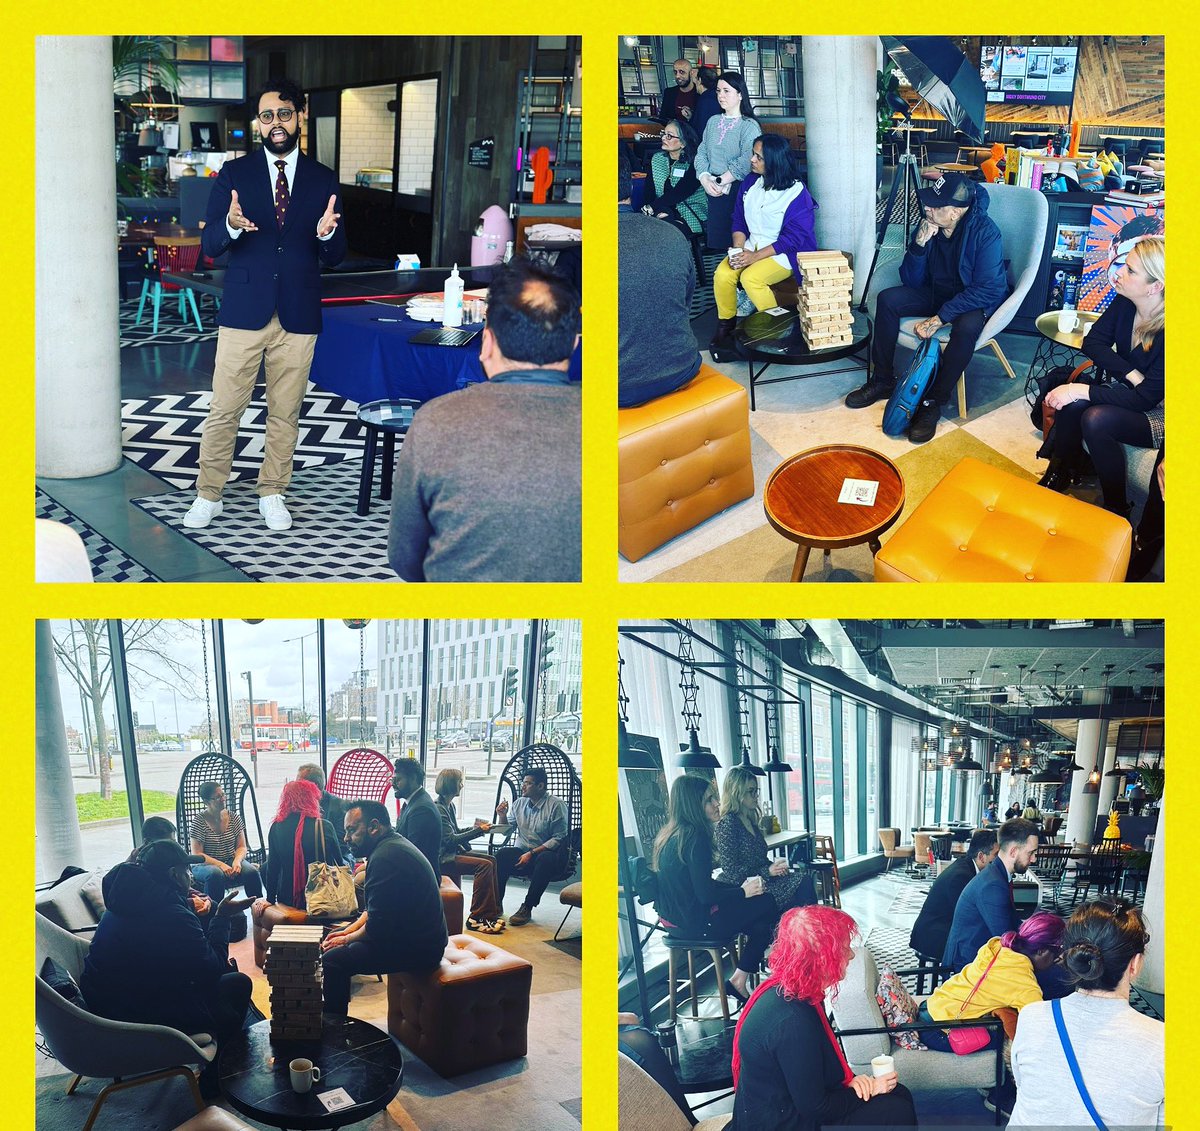 Great networking event held @moxyslough #businessculture #event #moxyhotels #slough